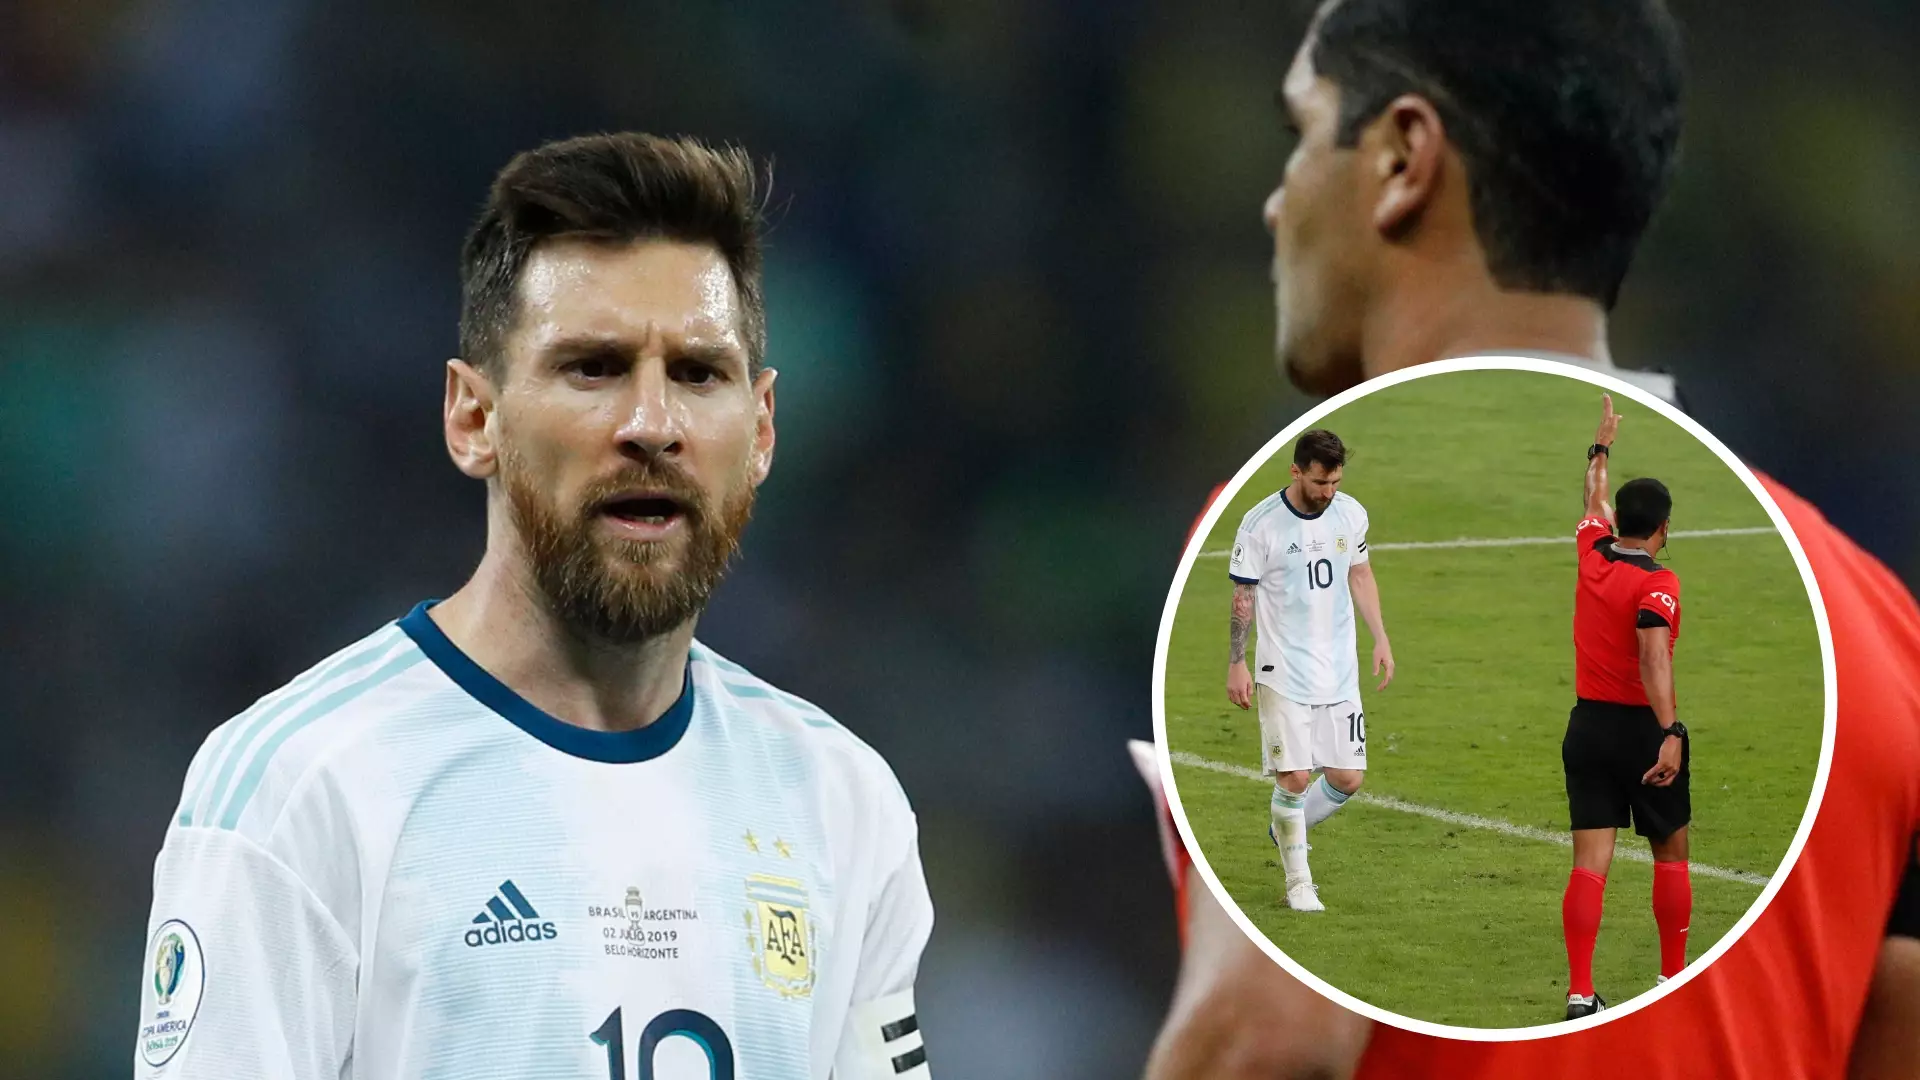 Argentina Are Outraged At Referee's Refusal To Use VAR's Advice For Two Important Penalty Appeals